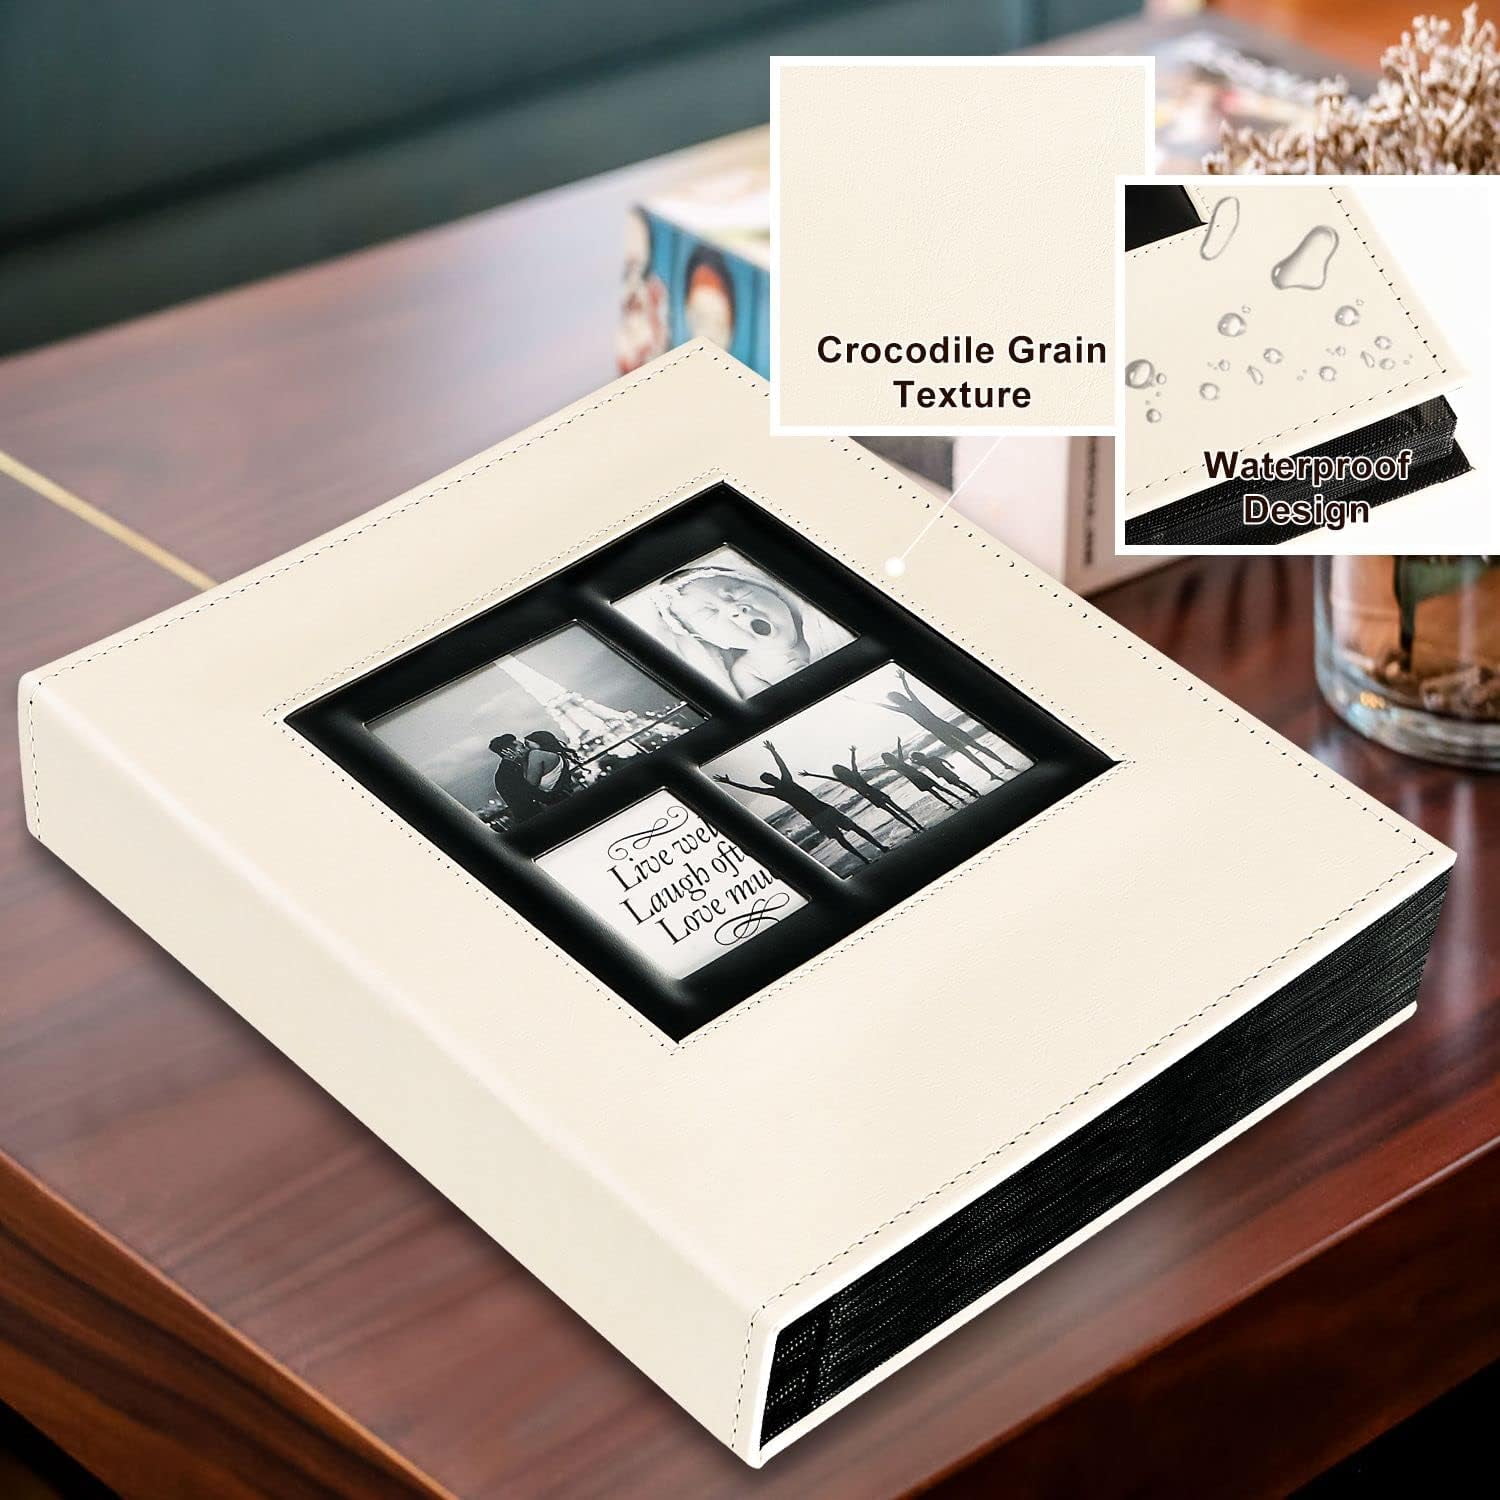 Ywlake Photo Album 4x6 500 Pockets Photos, Extra Large Capacity Family Wedding Picture Albums Holds 500 Horizontal and Vertical Photos Beige